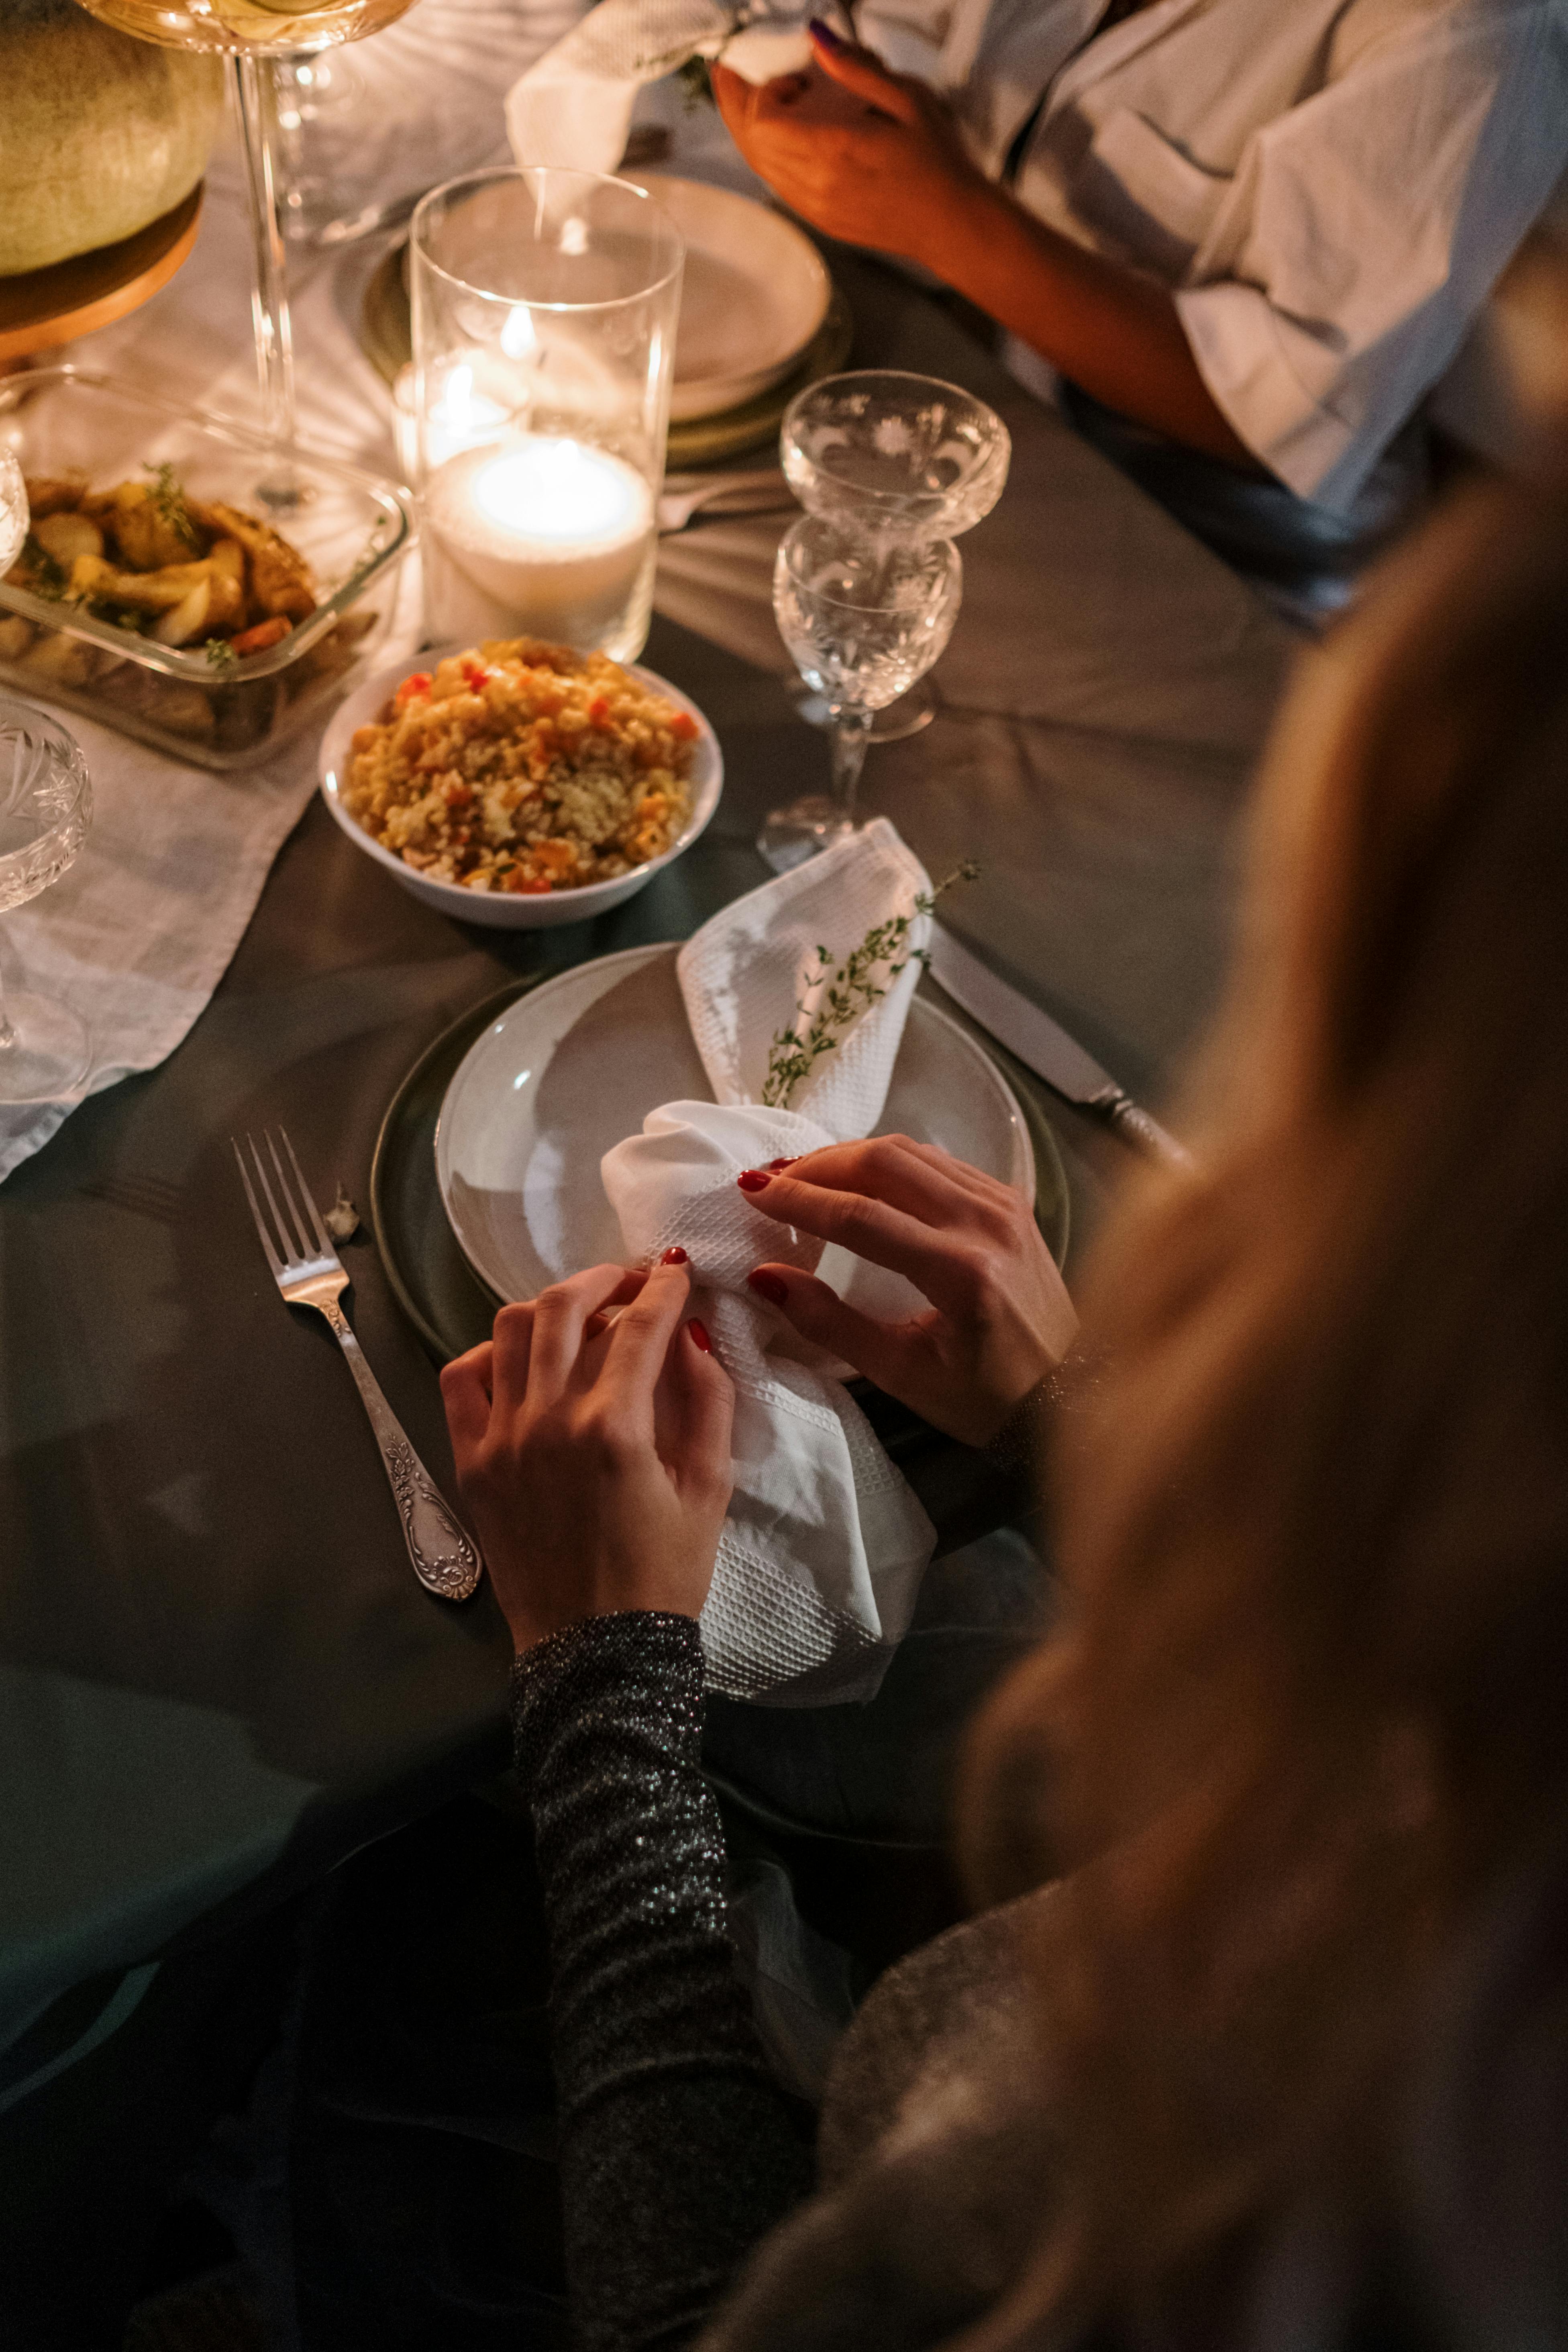 Natalies sits for a quiet dinner with Susan and George | Source: Pexels